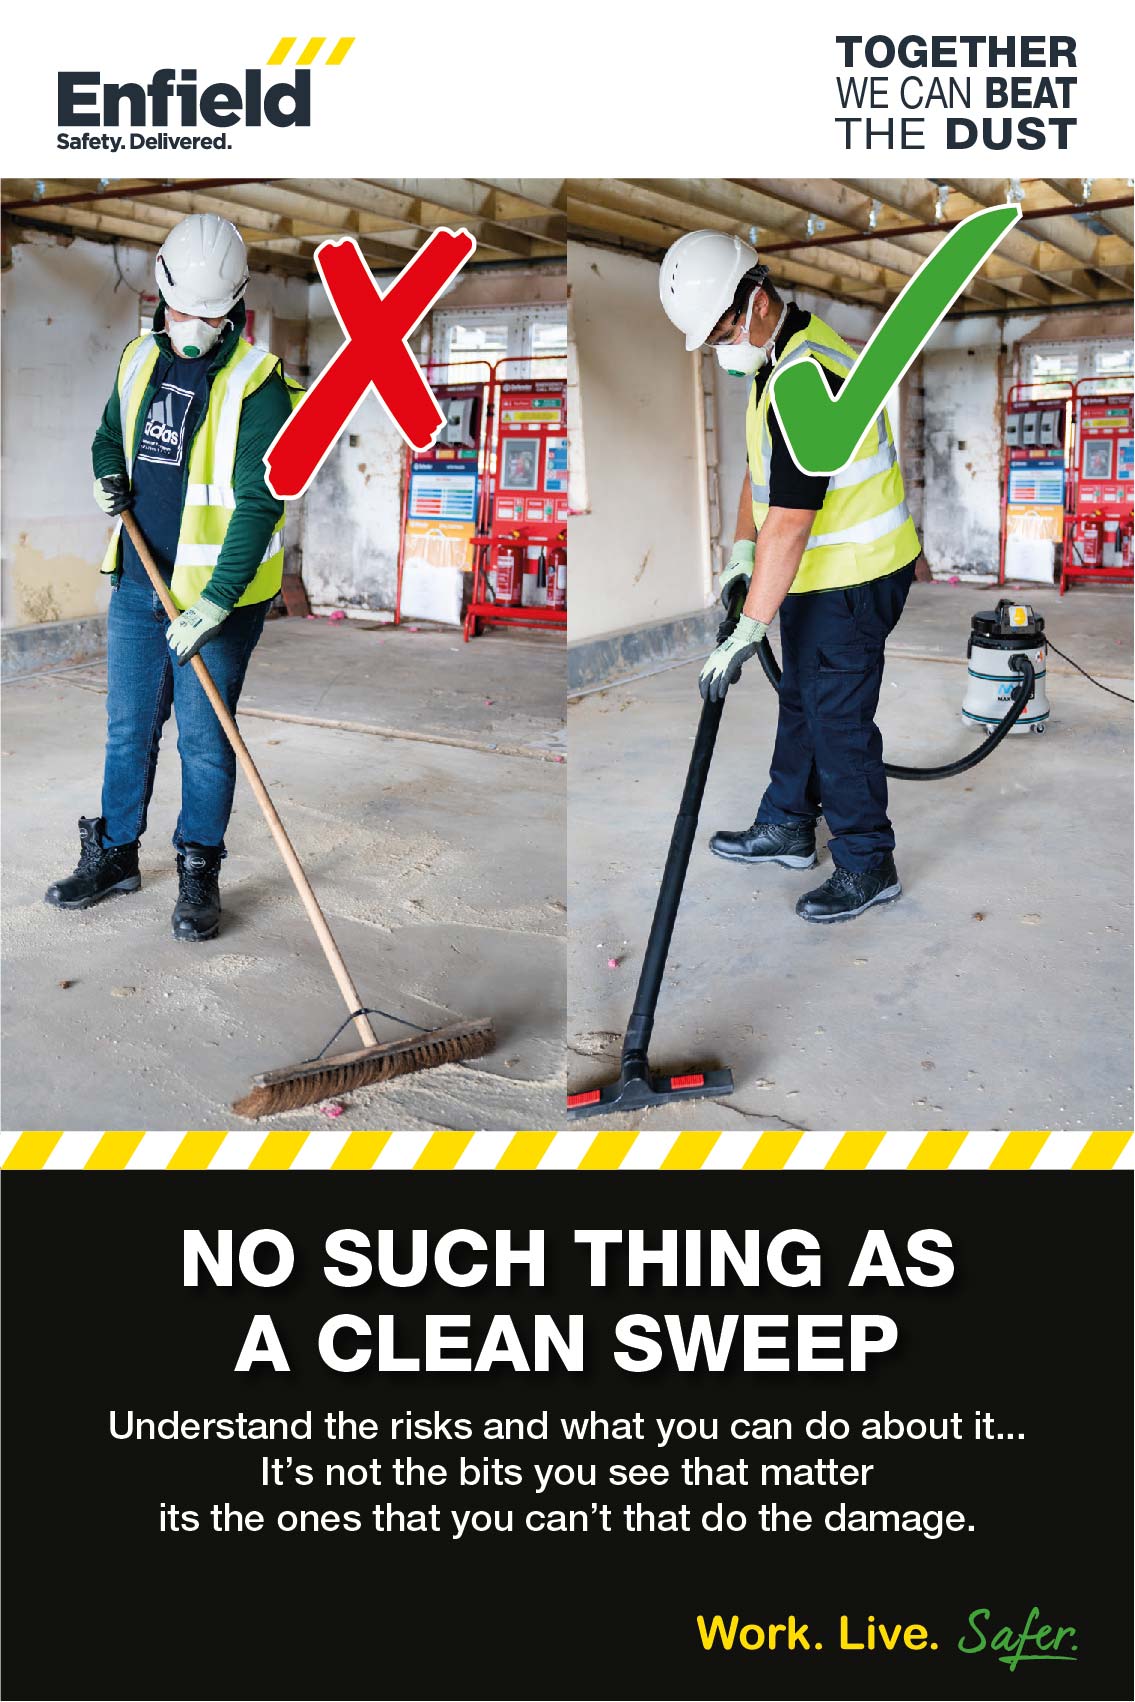 Enfield Dust Safety Poster 6